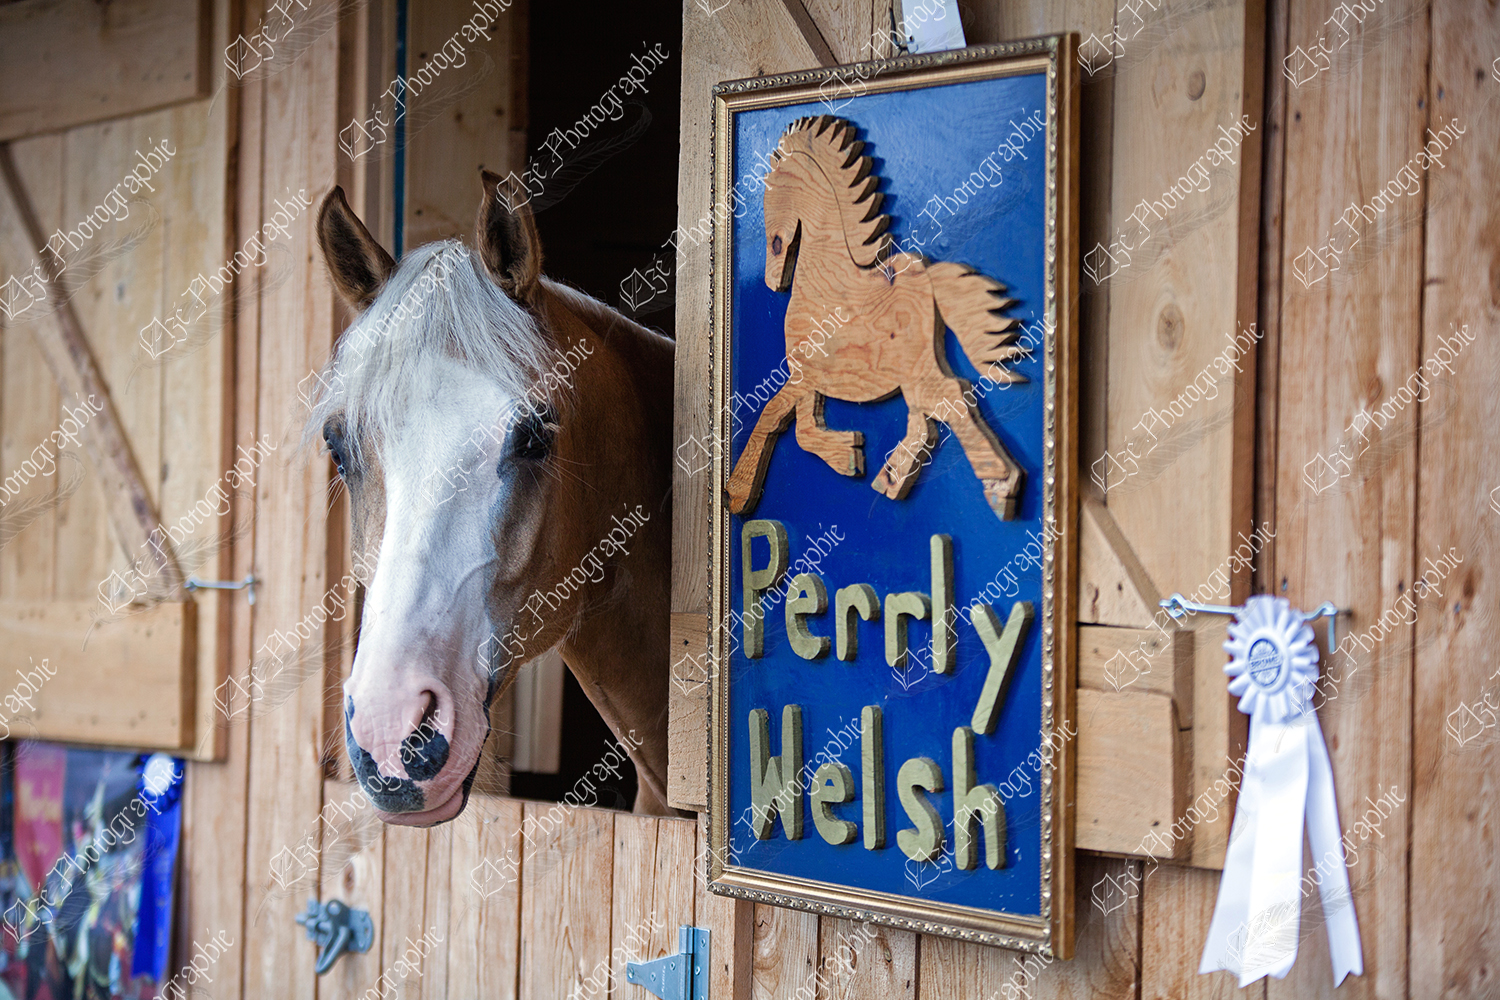 elze_photo_6565_boxe_cheval_welsh_horse_stable